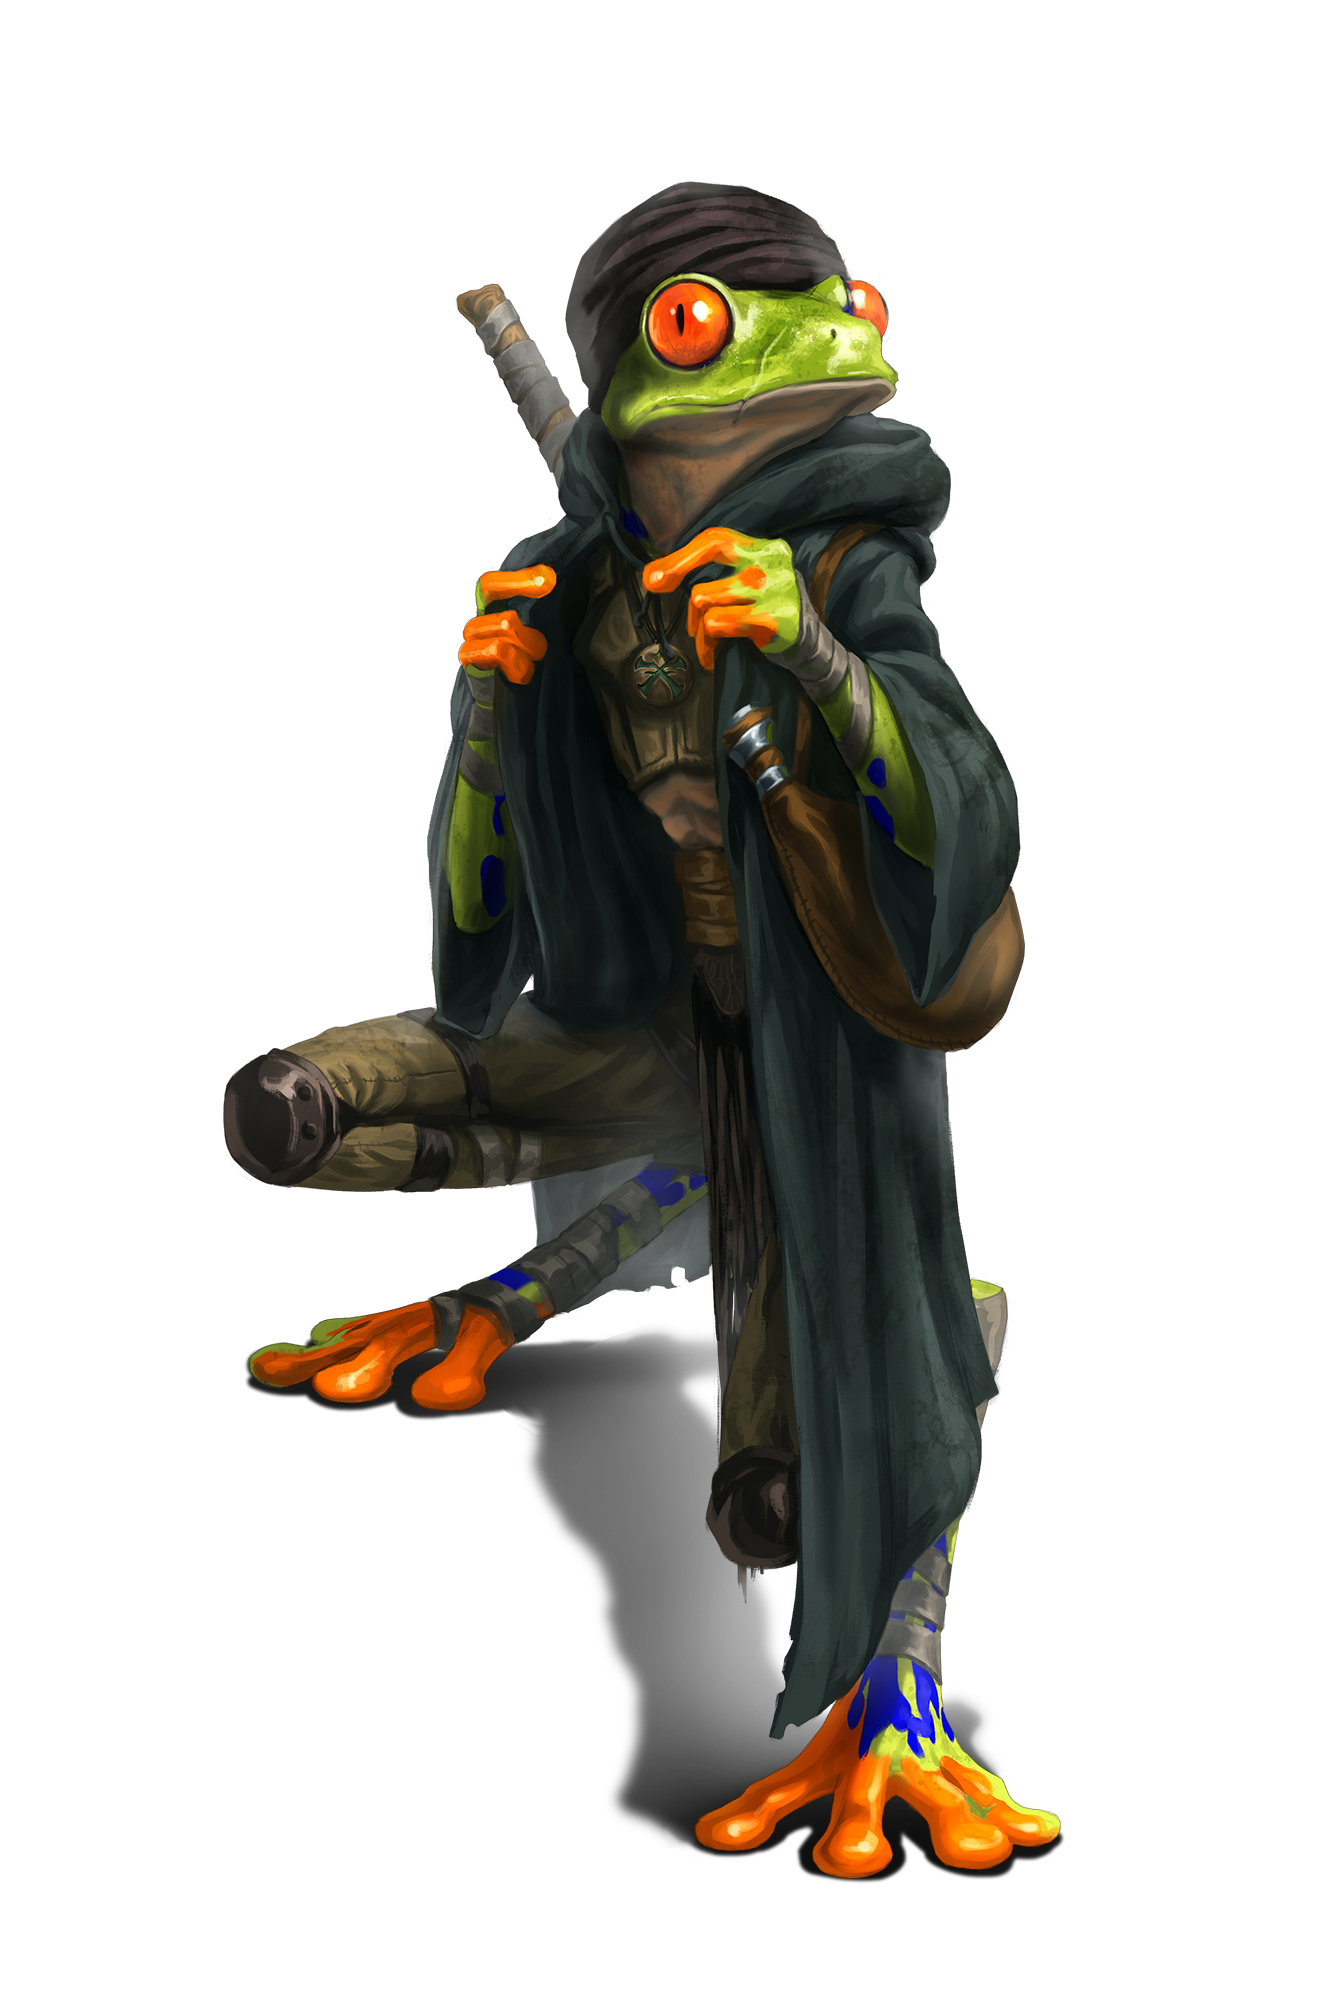 Po’ogaat, a bipedal tree-frog grippli dressed in dark robes with a pouch under one arm and a staff on their back